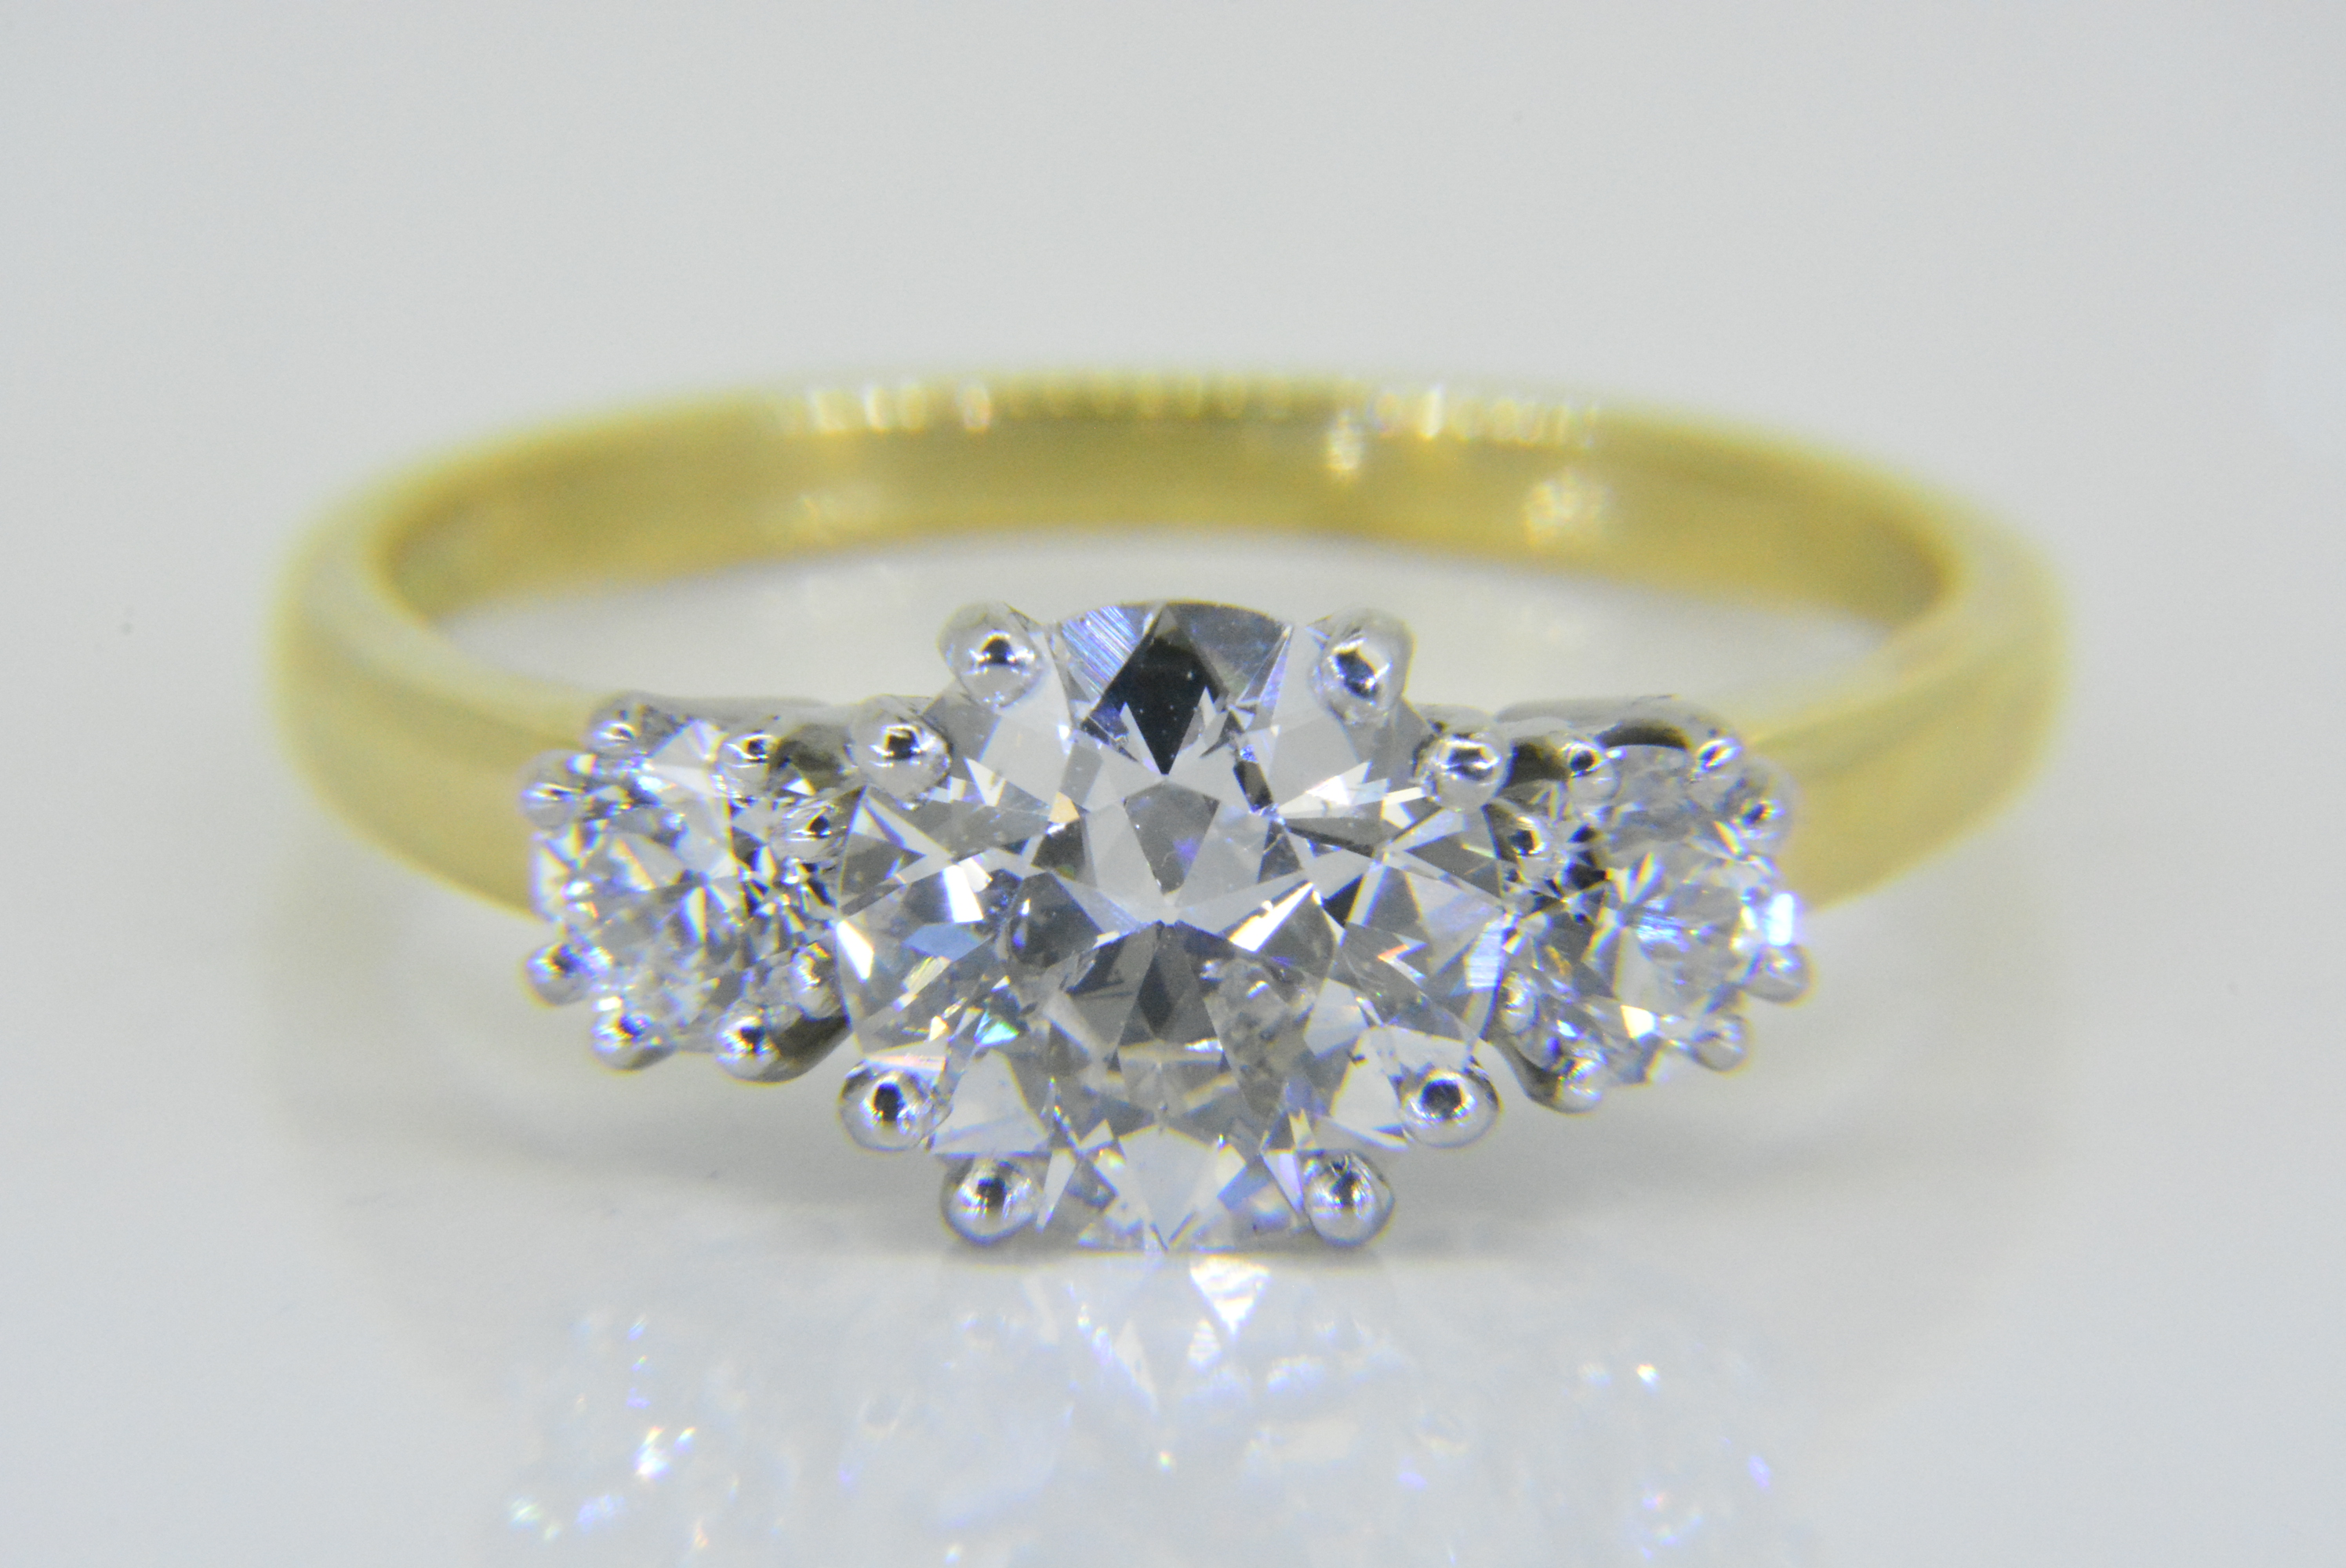 Stunning 4ct diamond ring created by Jethro for Susan - Jethro Marles